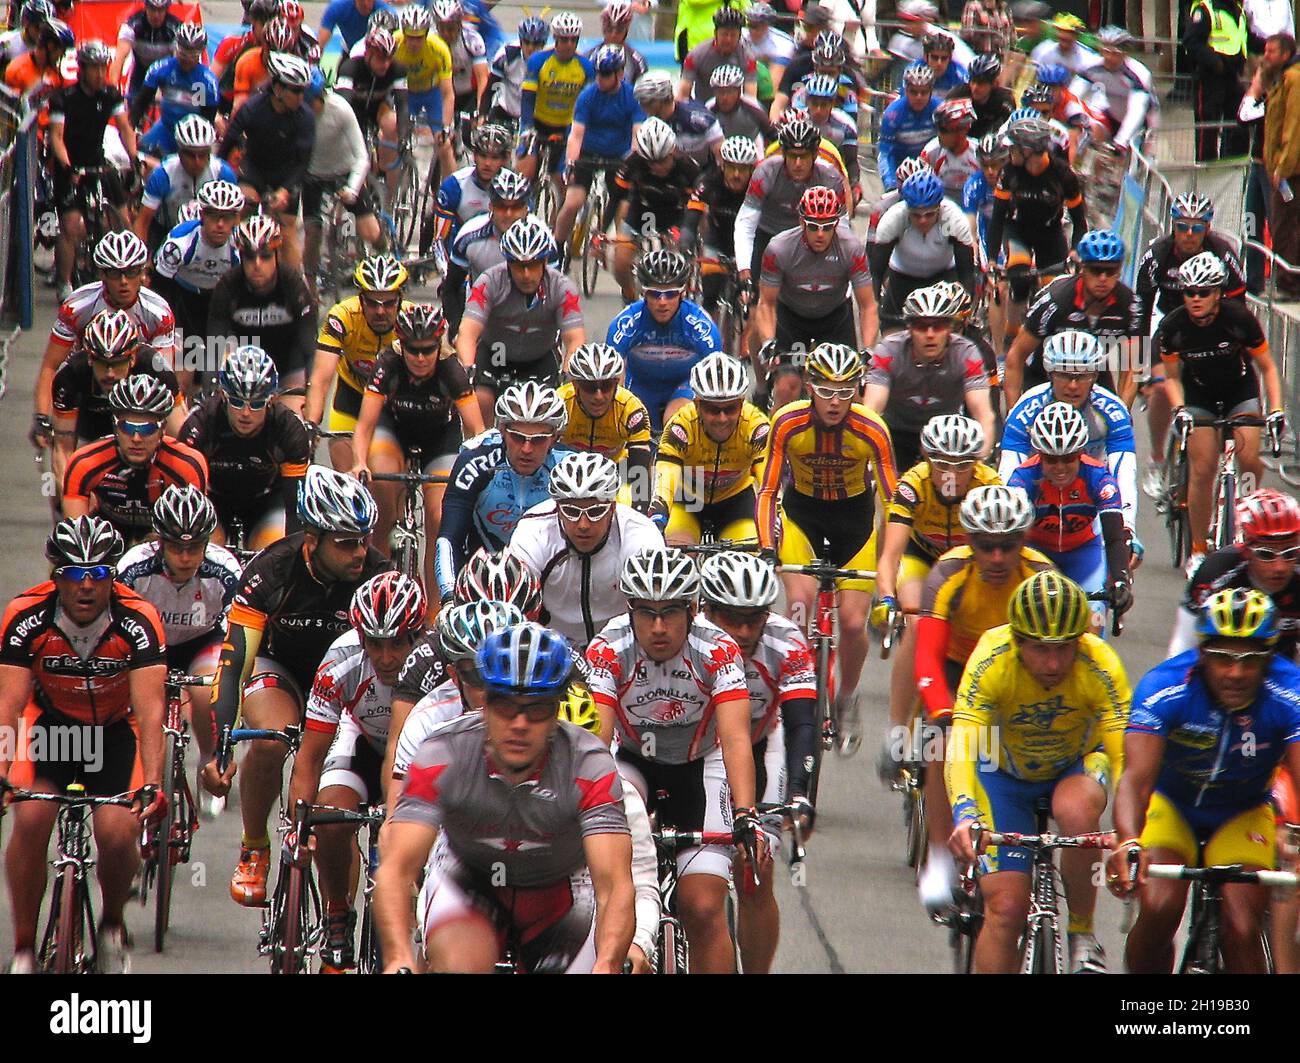 2008 amateur cycling nationals free hd photo